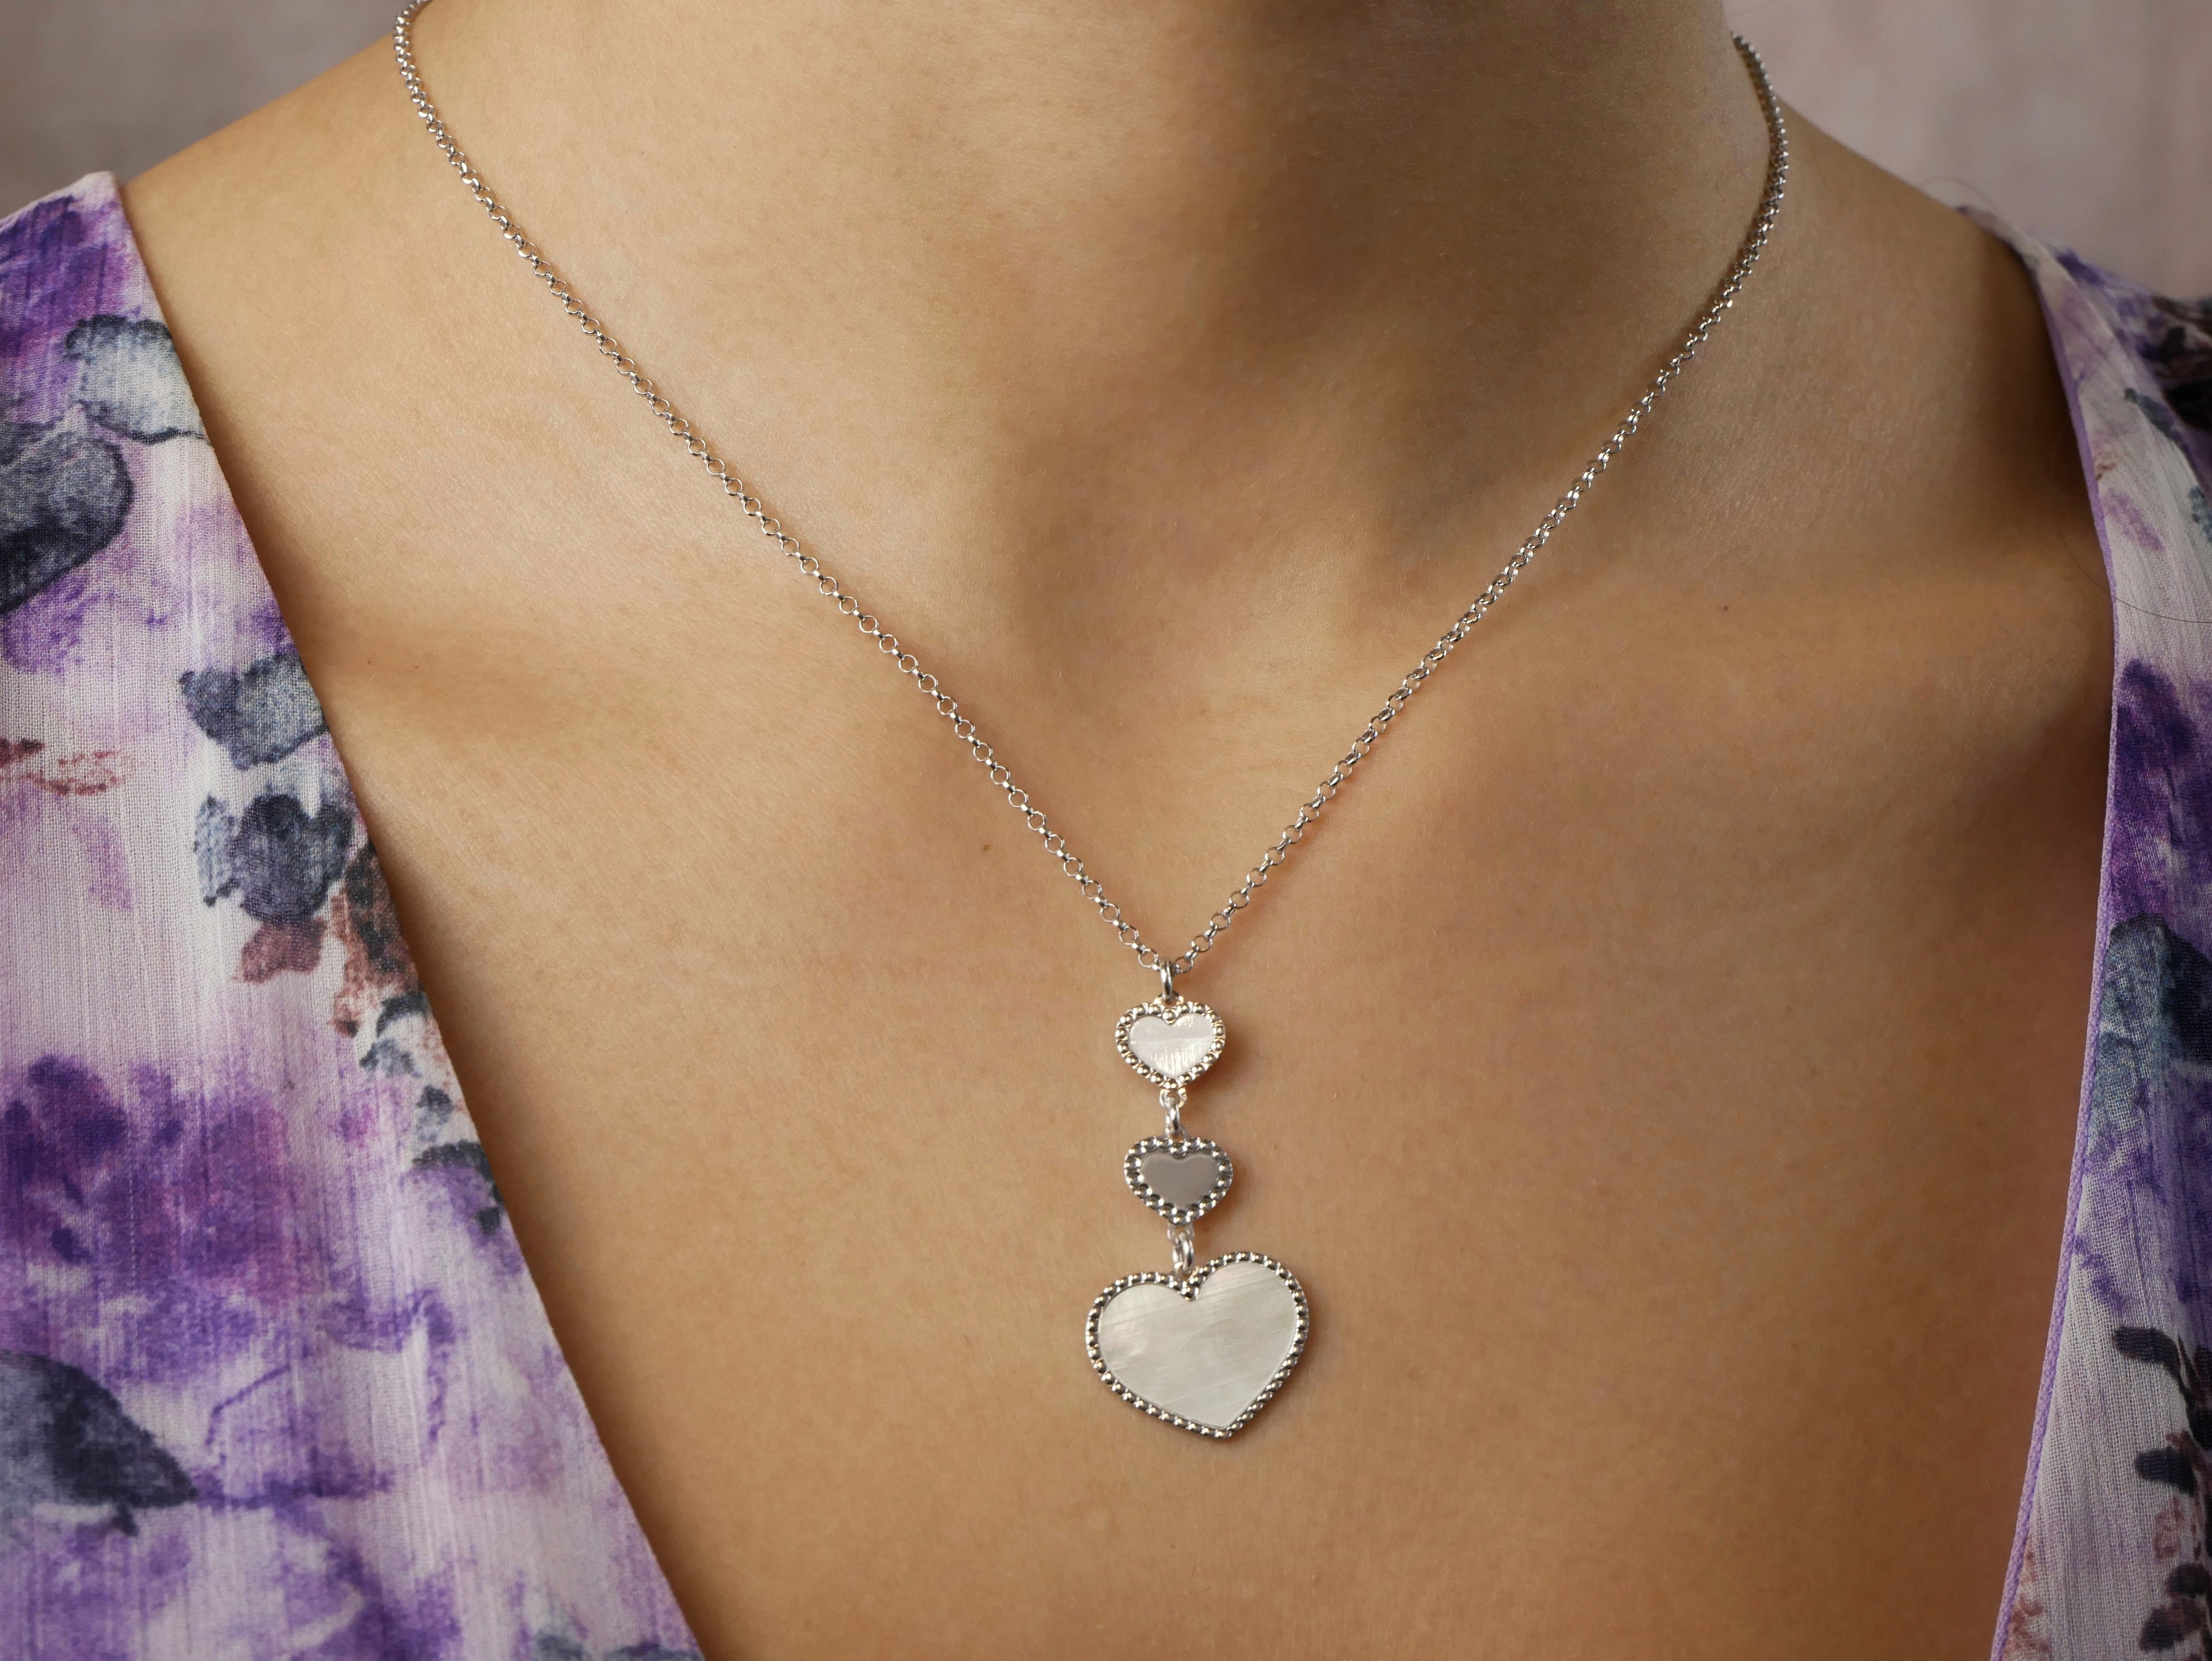 Heart mother of pearl necklace